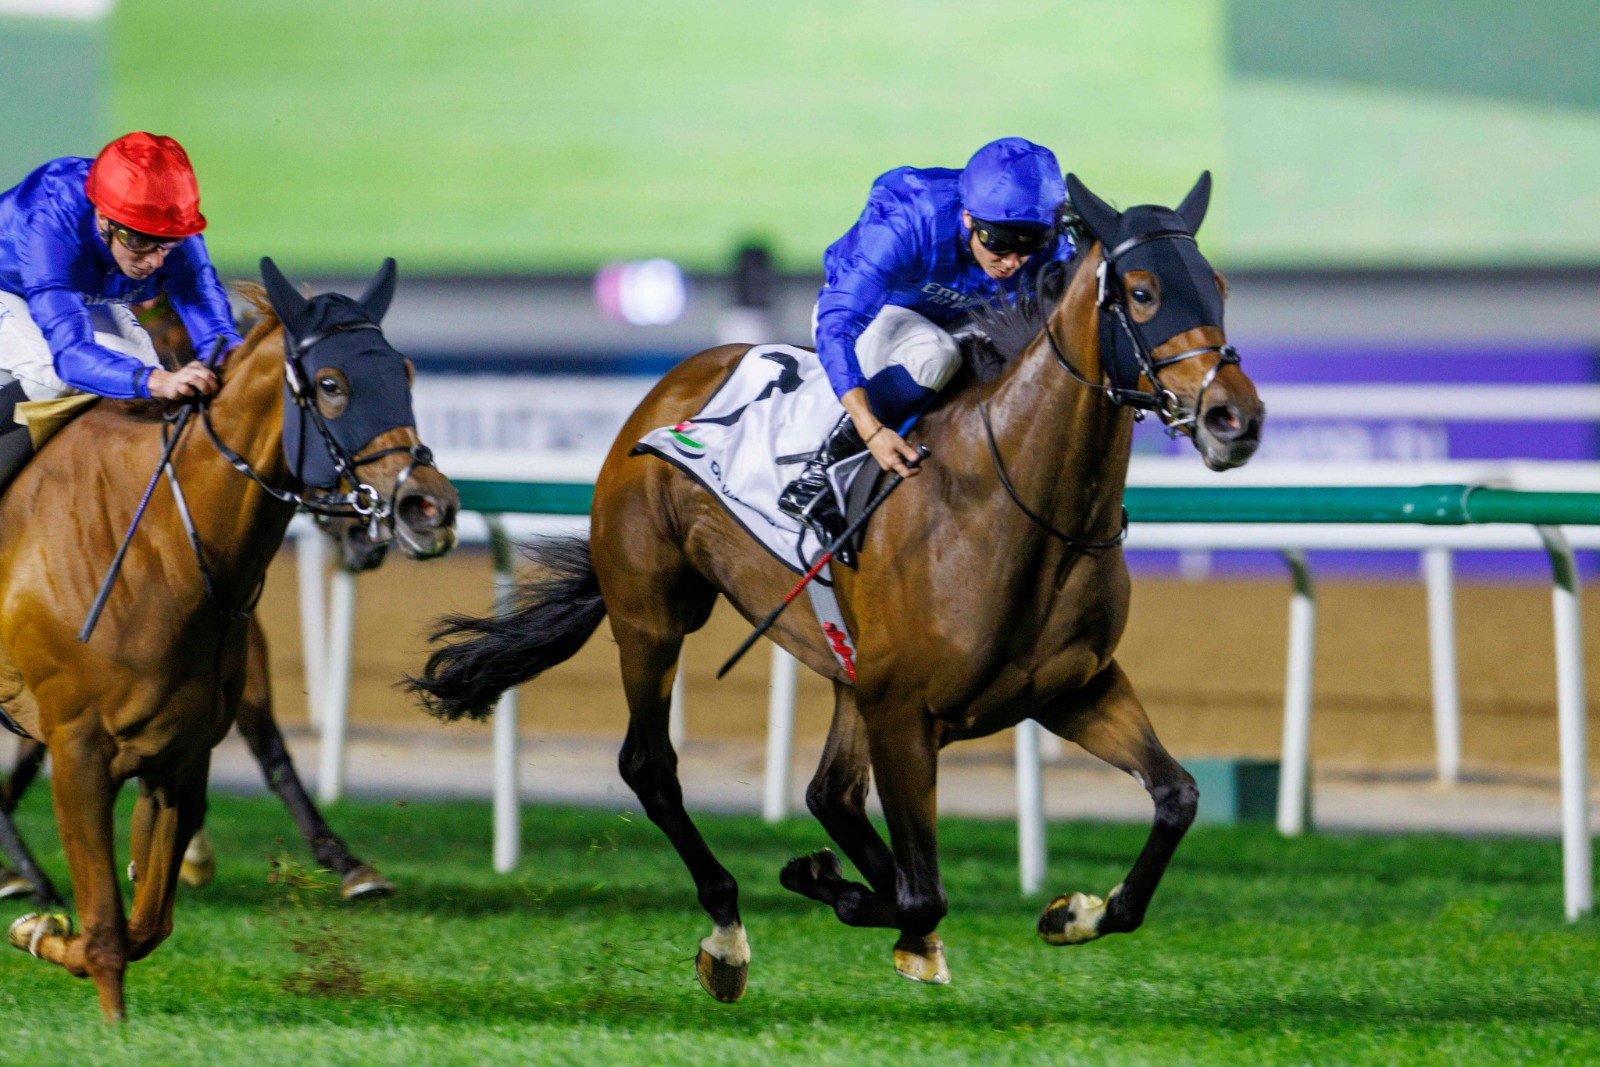 Silver Lady presents Godolphin with the 11th star in the Cape Verde Championship in Meydan